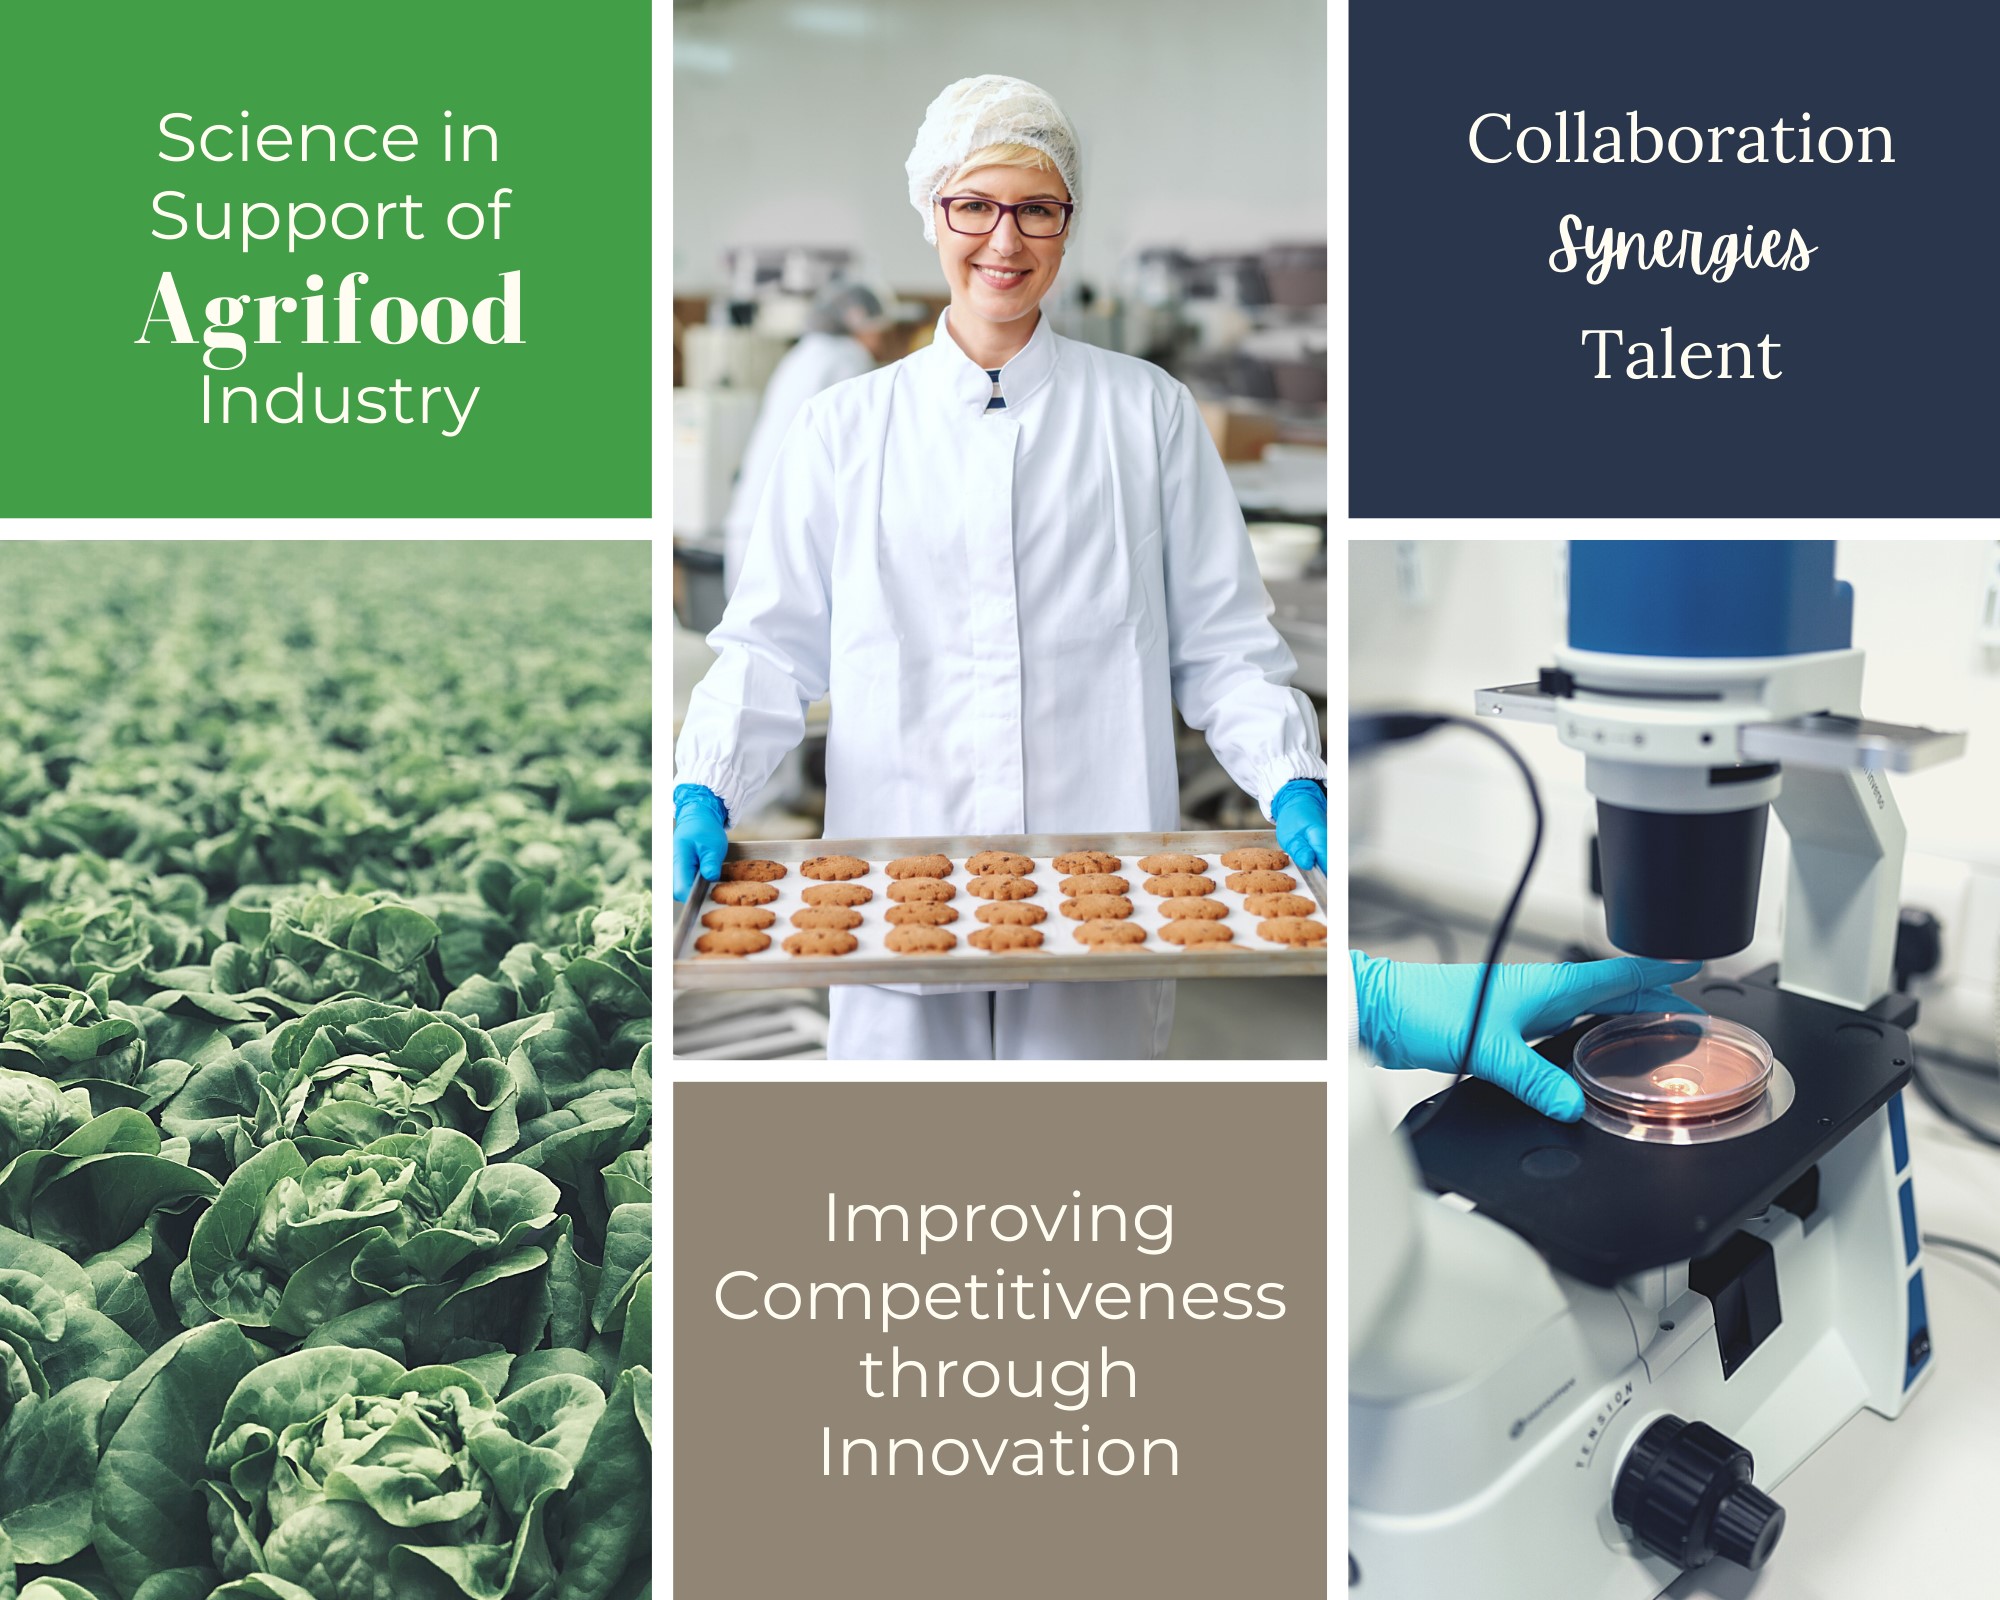 Science in Support of Agri-food Industry: Collaboration - Synergies - Talents